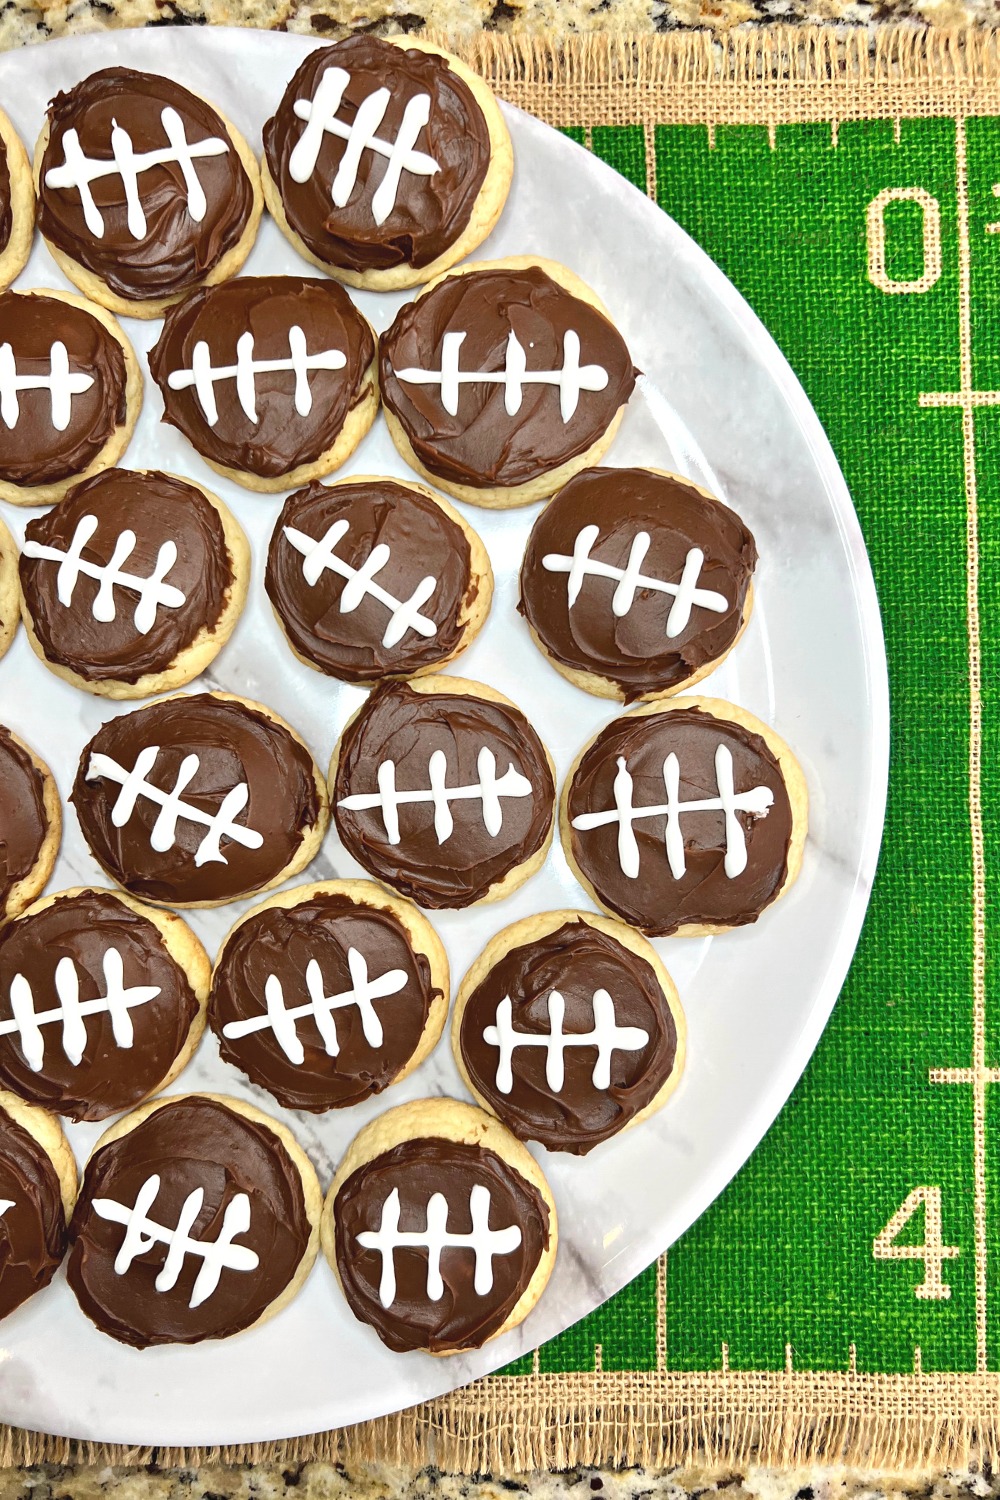 Image of half of a plate arranged with football cookies